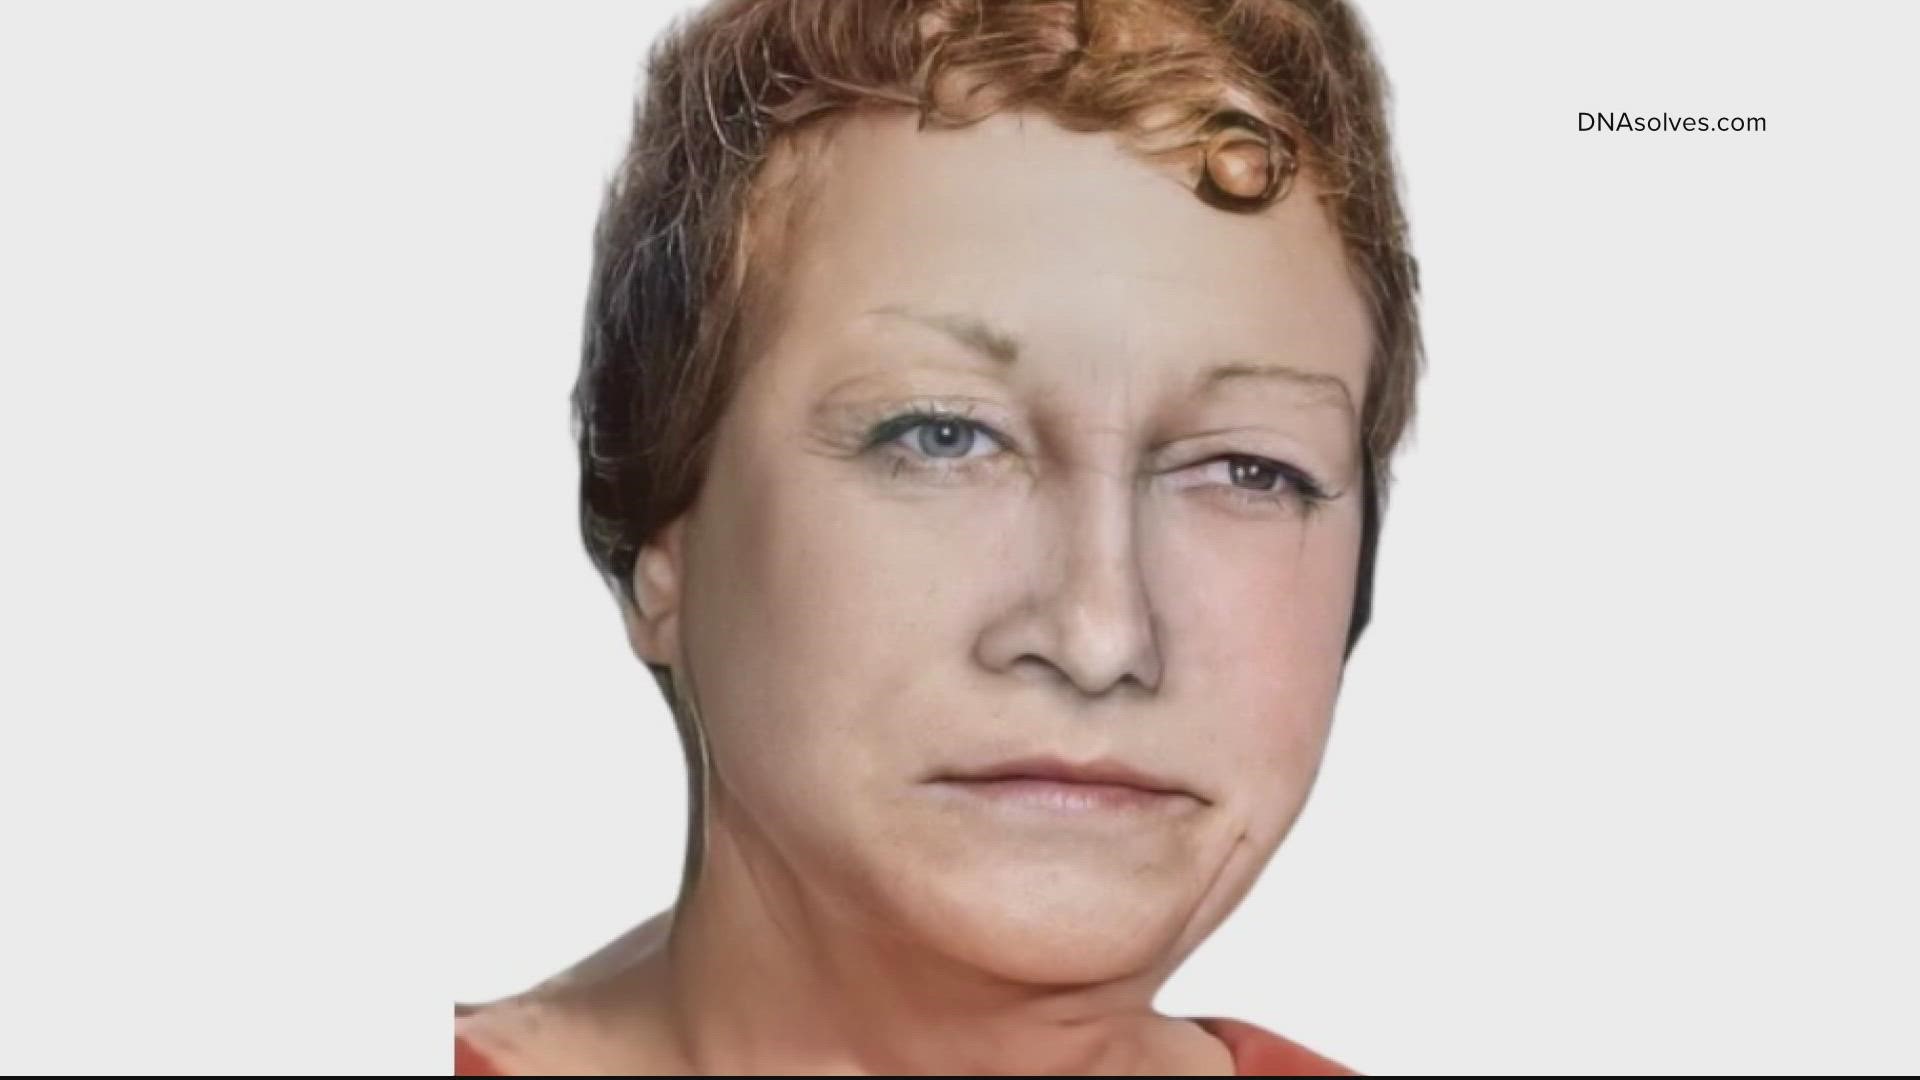 Cold case: Lab hopes to ID Fairfax County 